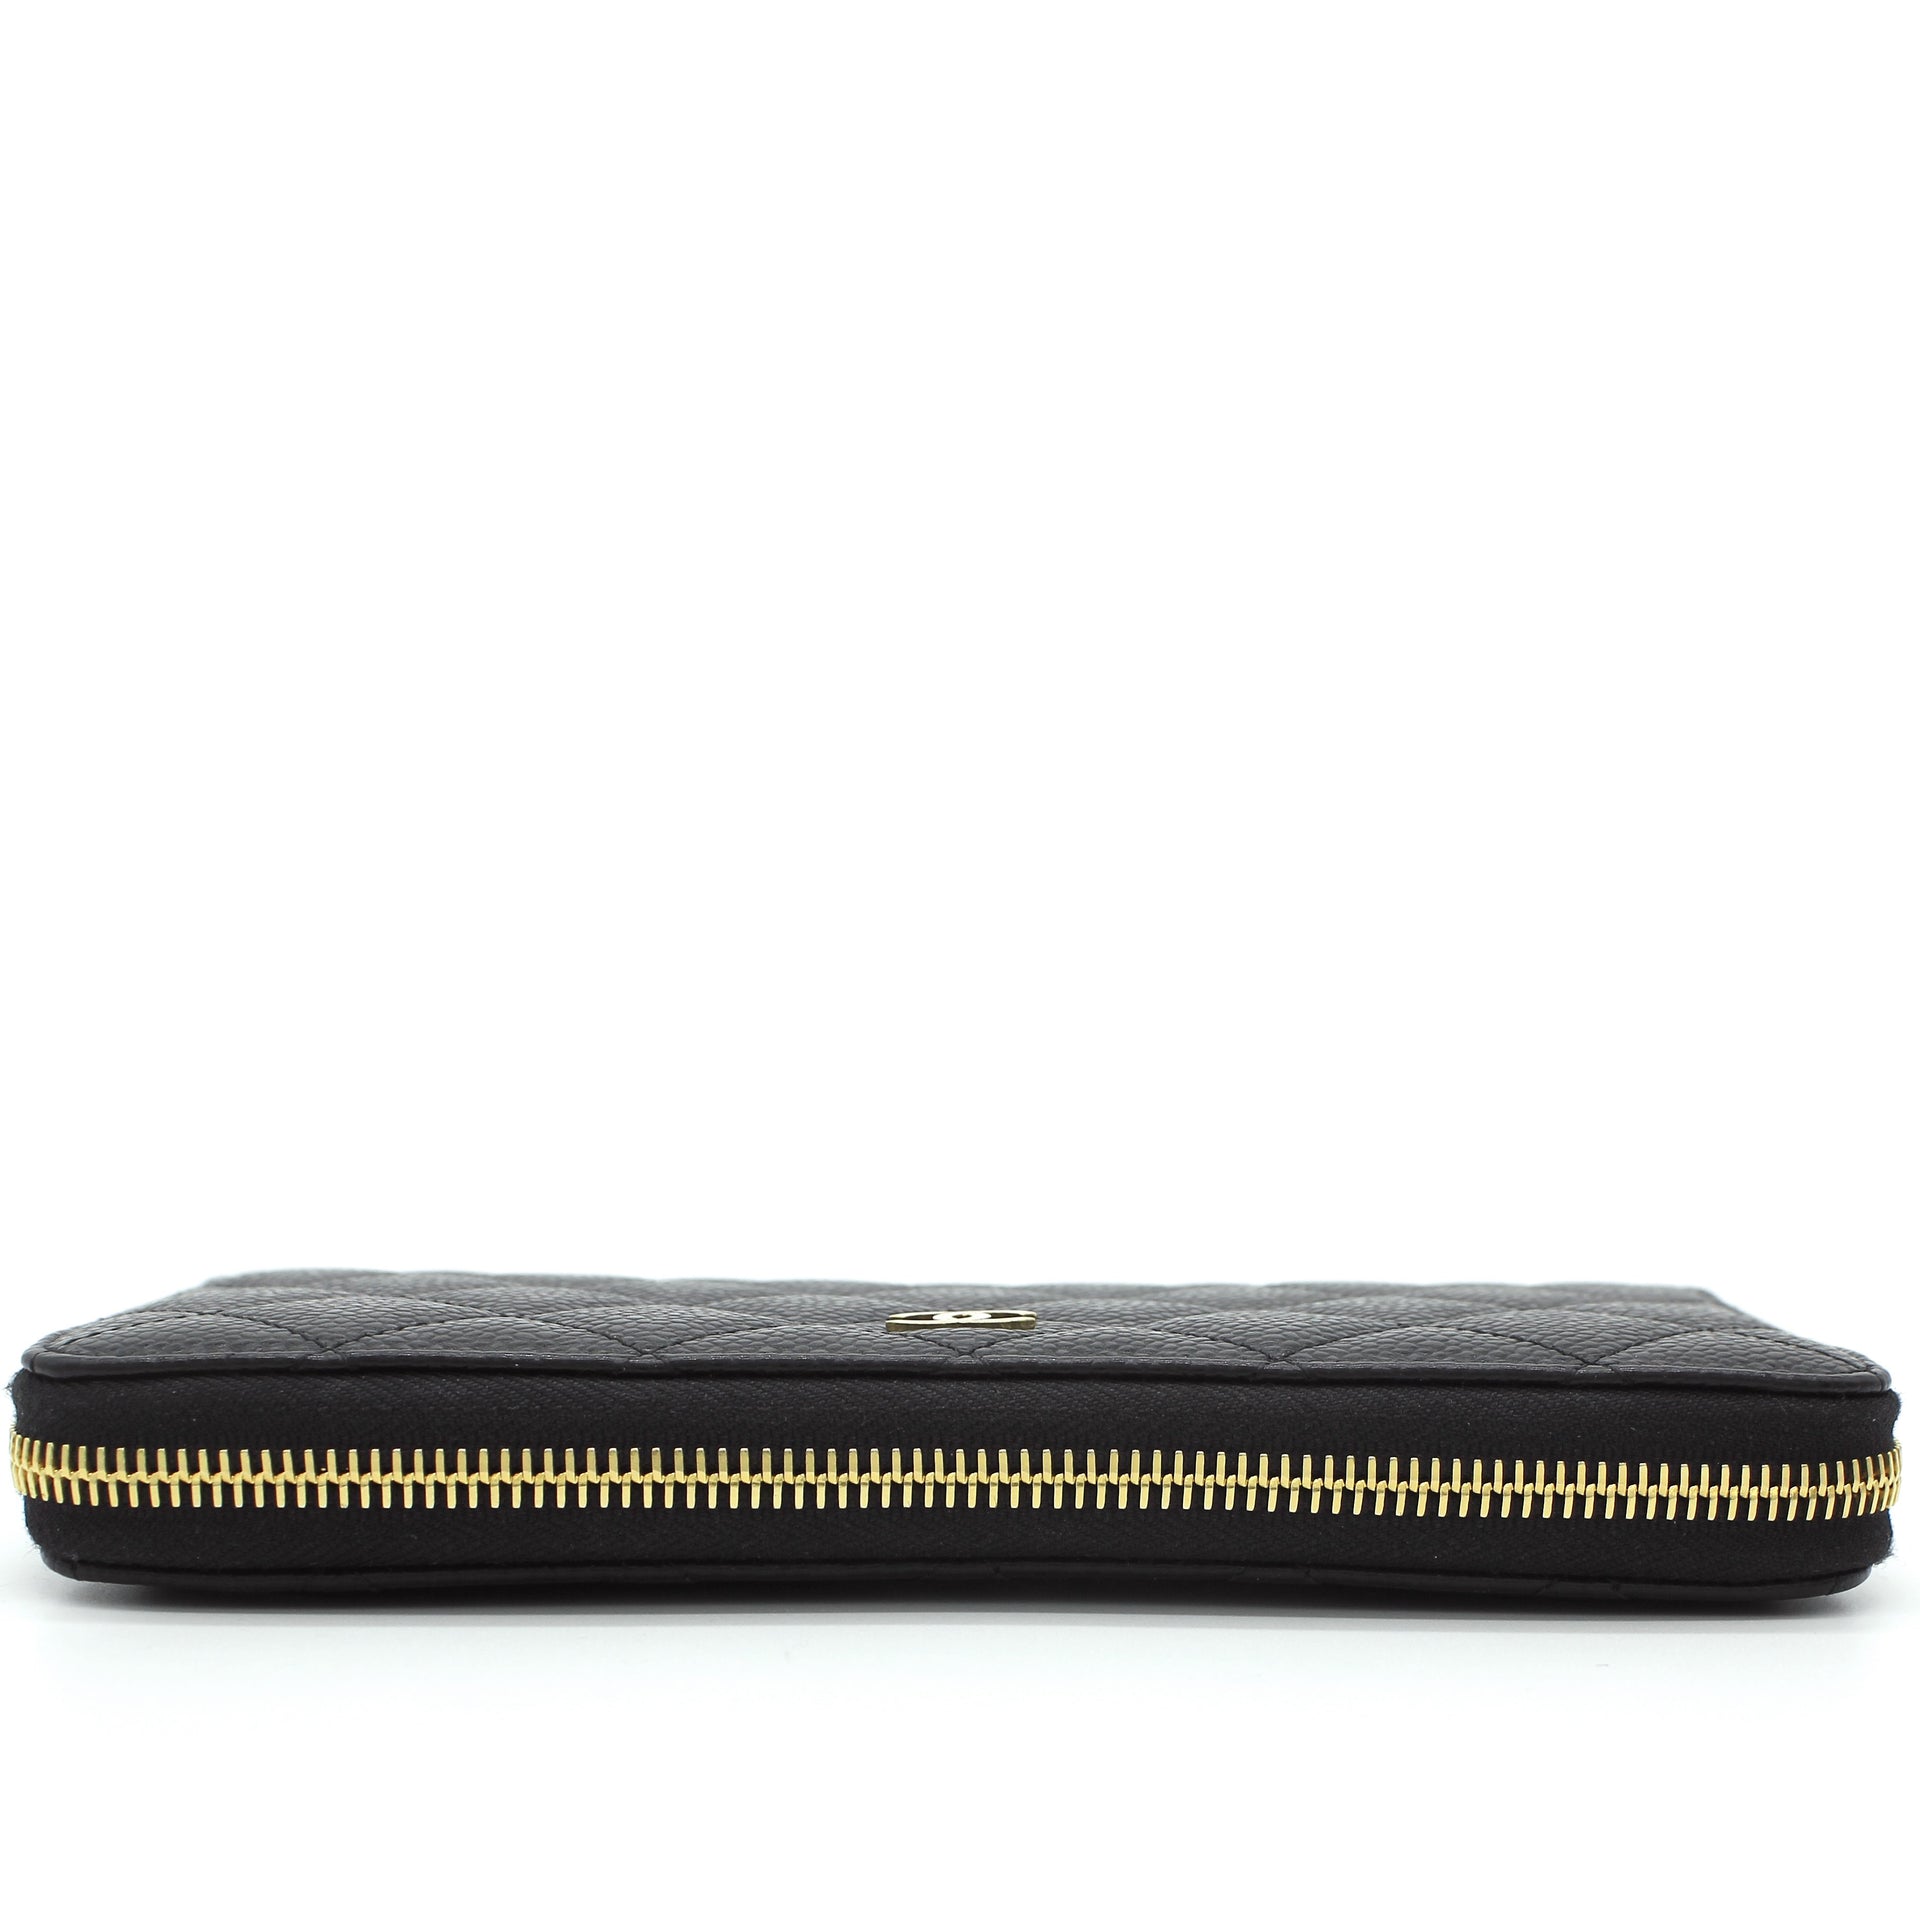 Caviar Quilted Large Gusset Zip Around Wallet